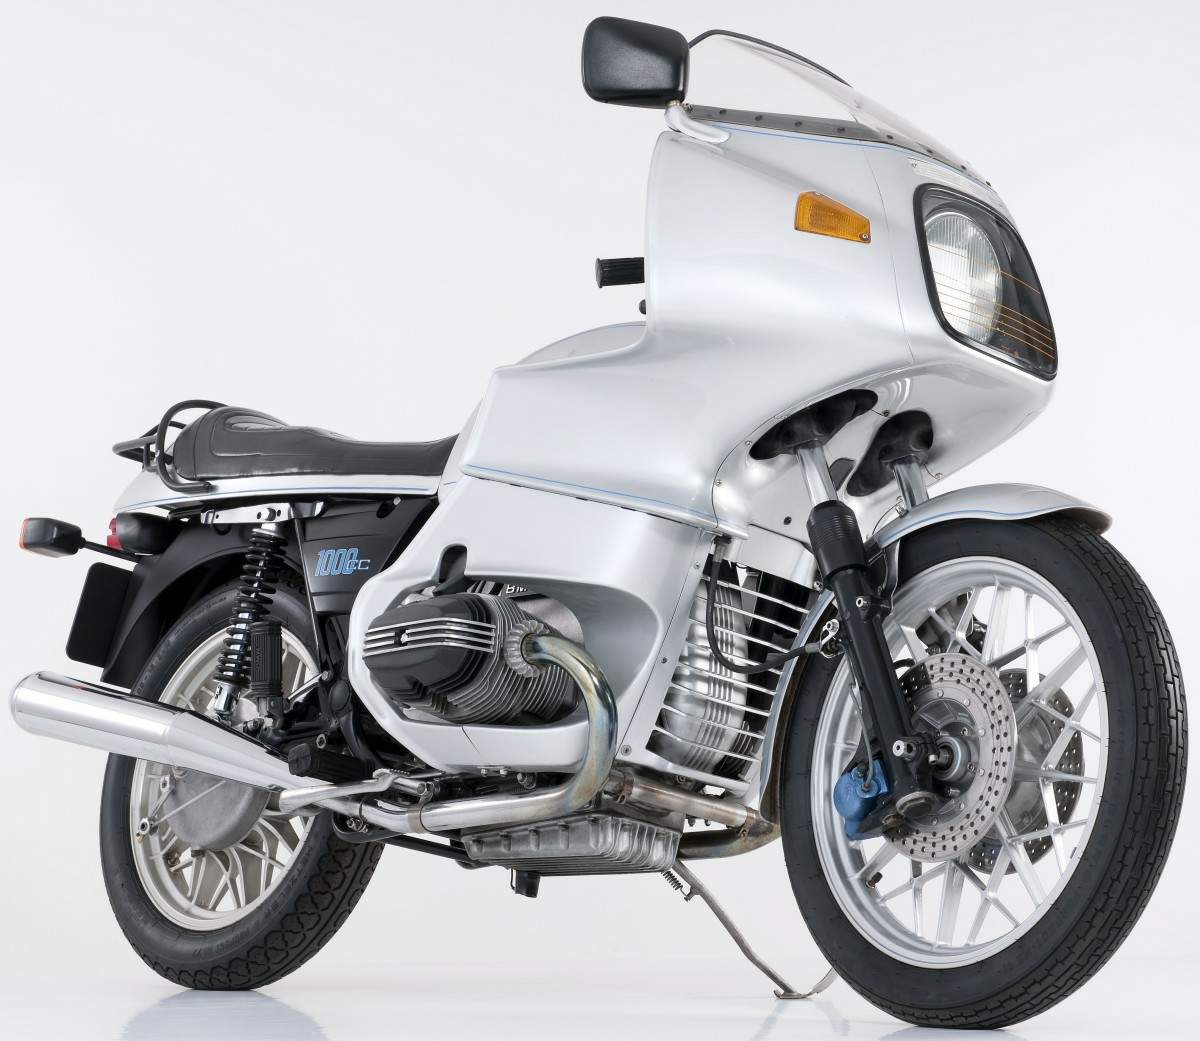 http://www.motorcyclespecs.co.za/Gallery/BMW R100RS  1.jpg